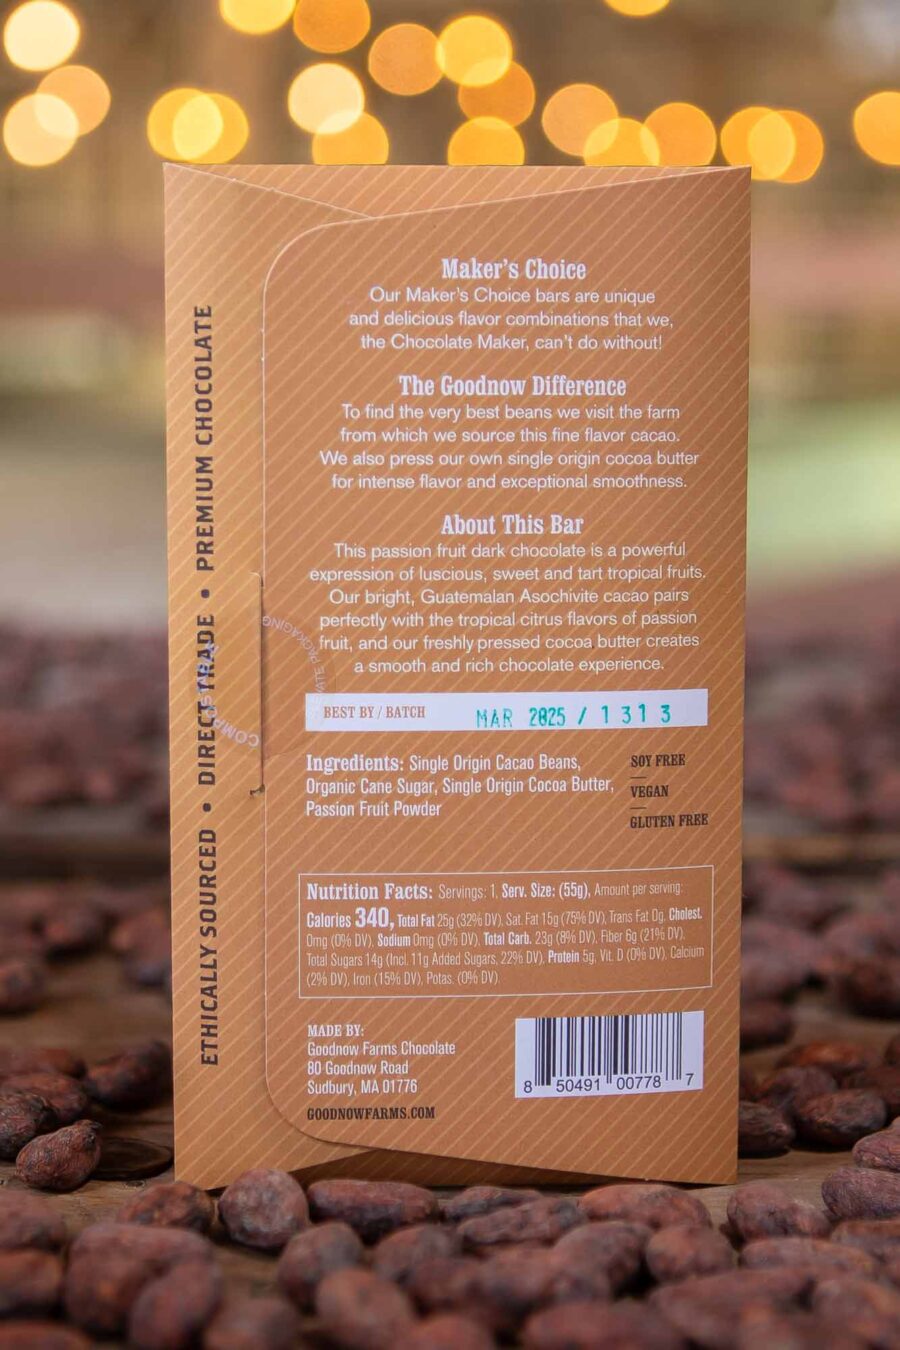 Goodnow Farms Maker's Choice Guatemala 70% Dark Chocolate Bar with Pure Passion Fruit Back